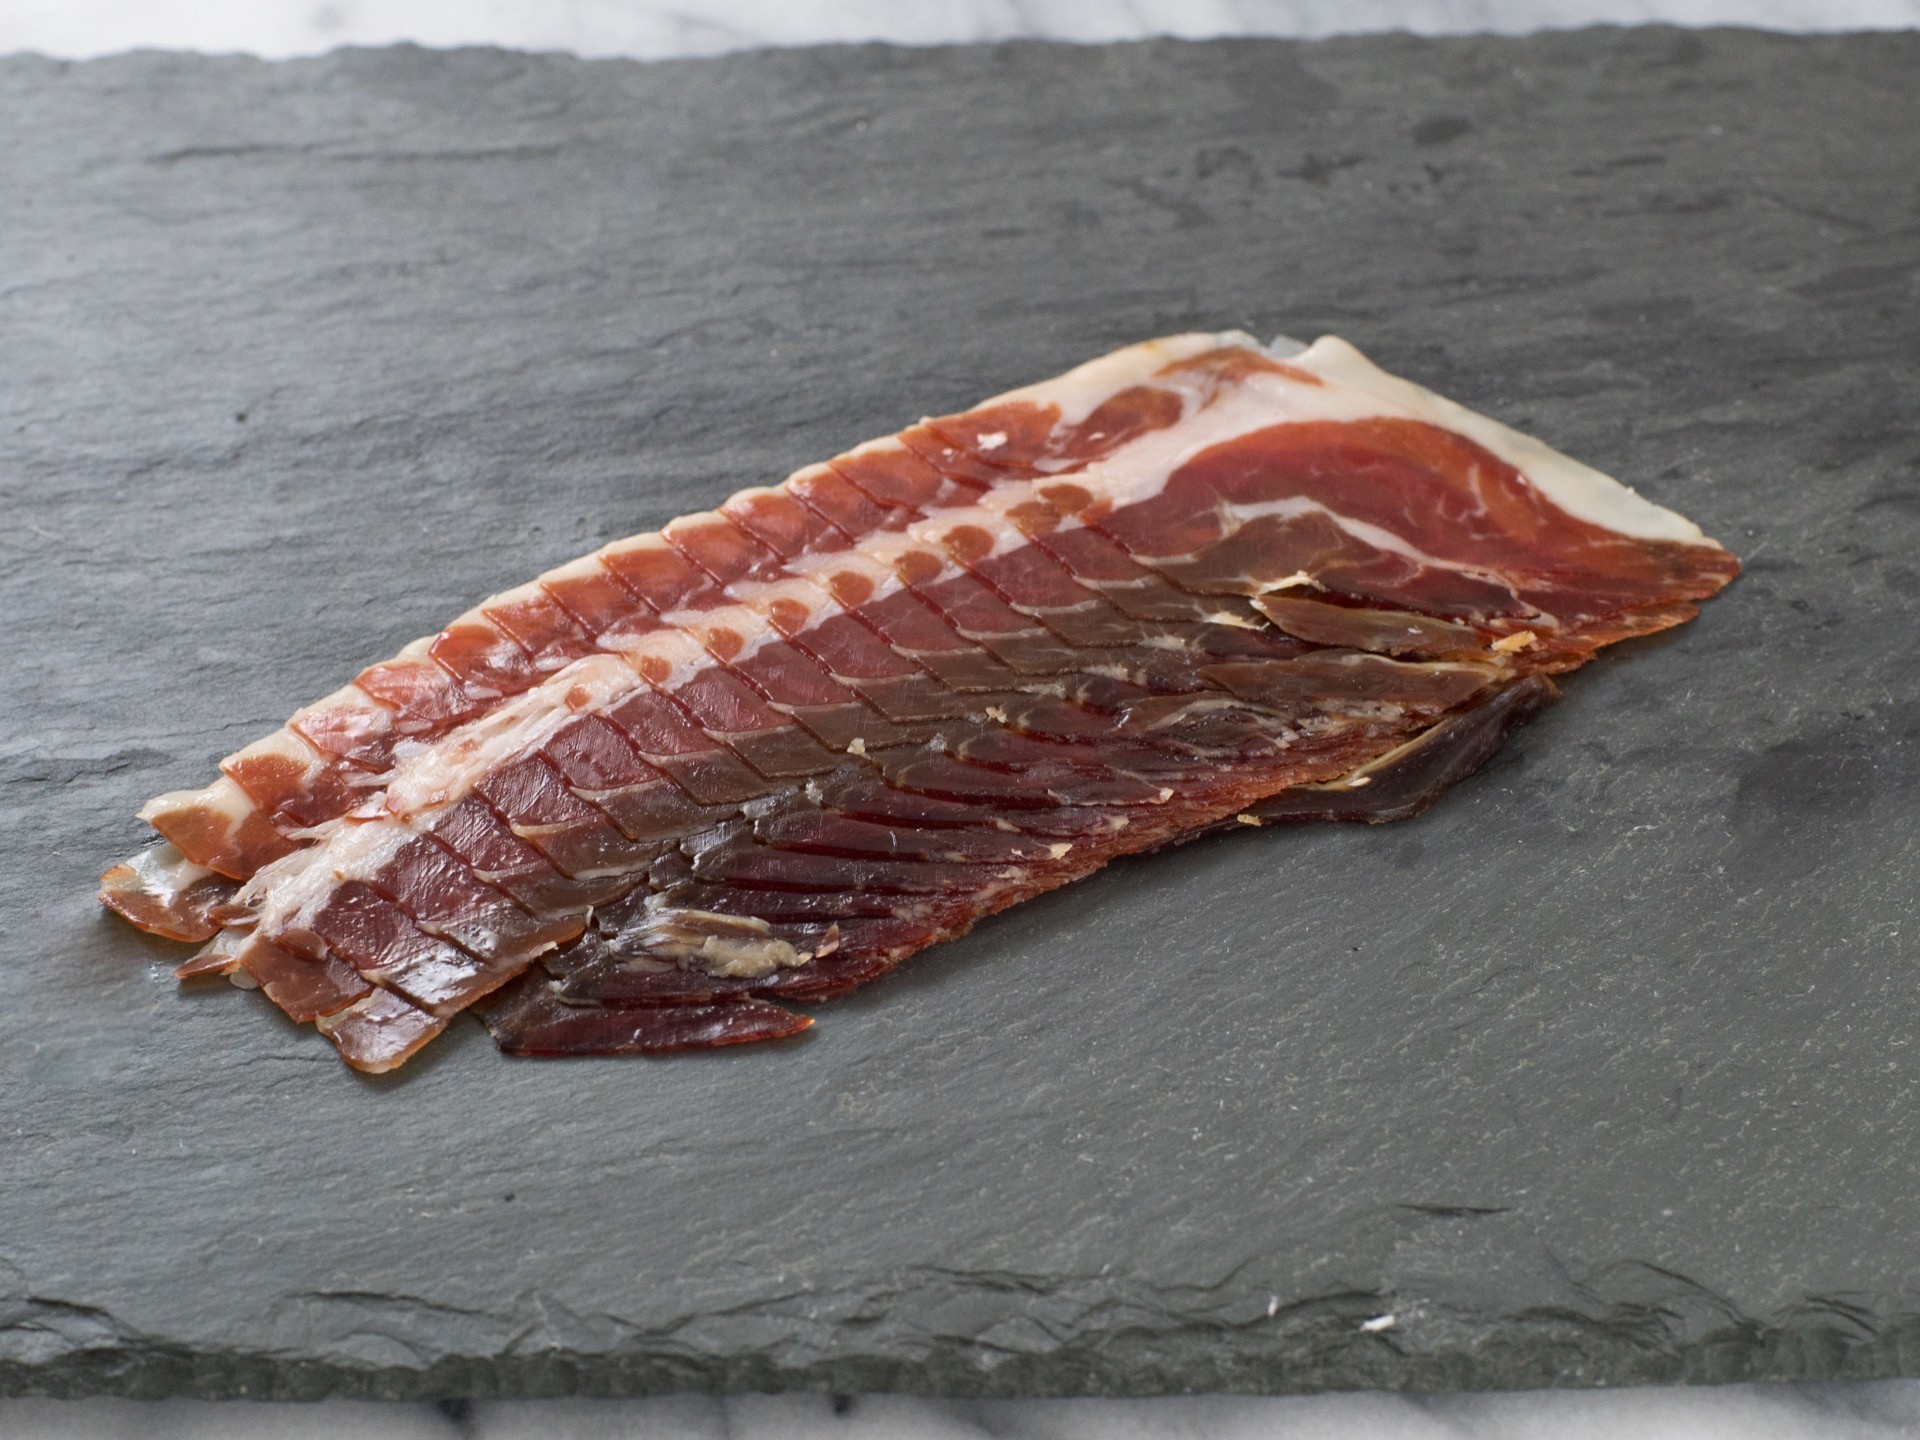 Iberico Dry Cured Ham from Spain